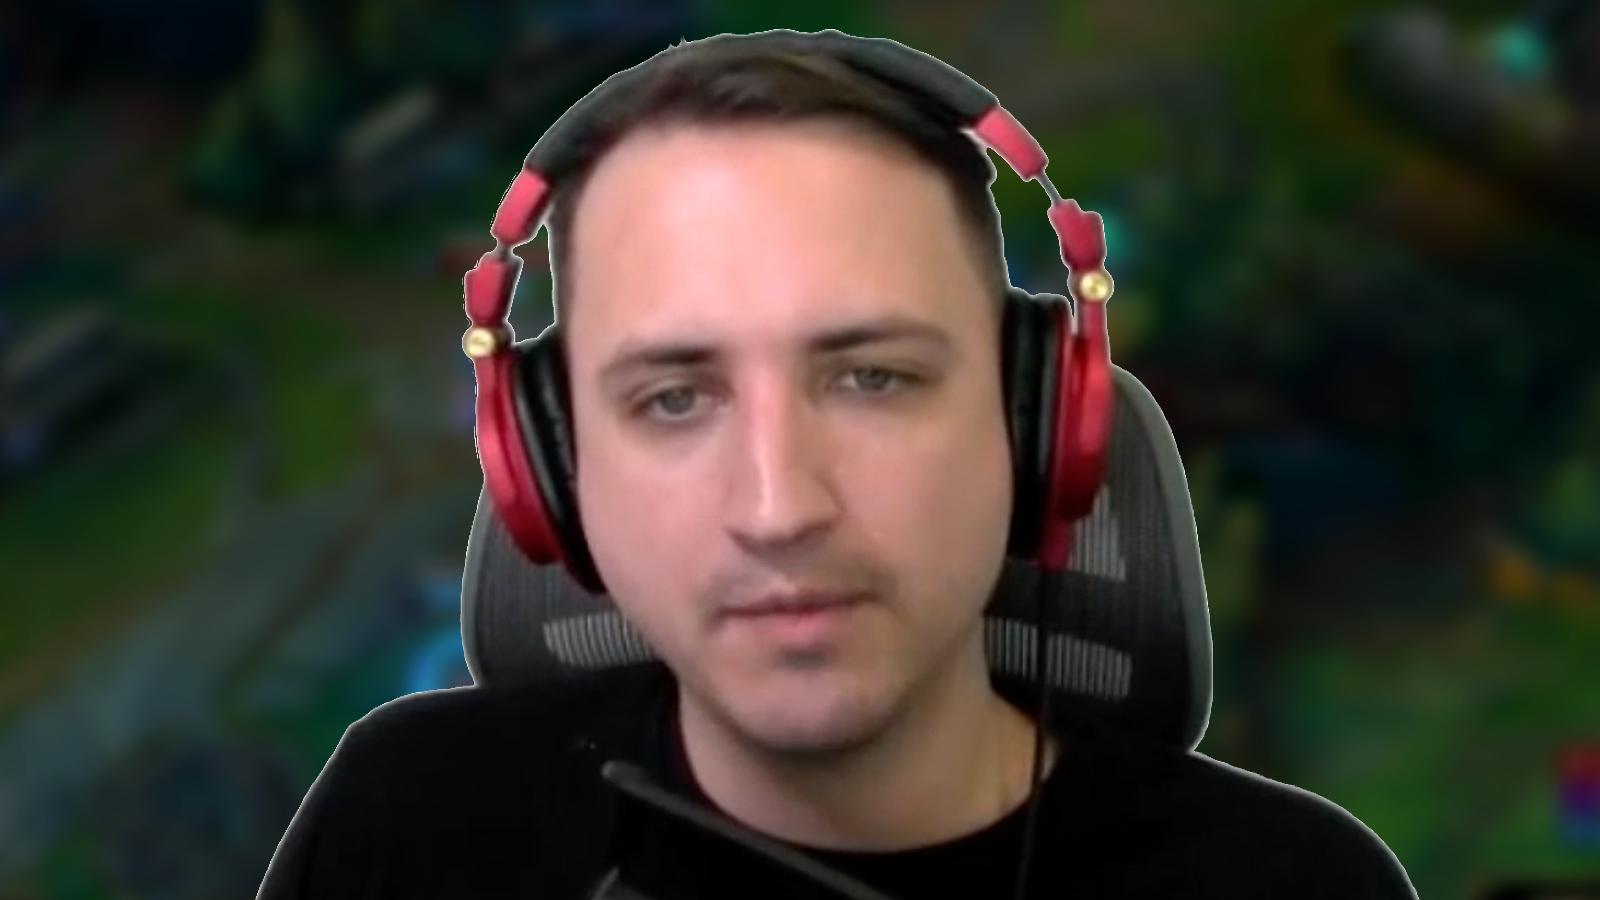 montecristo on stream with blurred league of legends rift in background